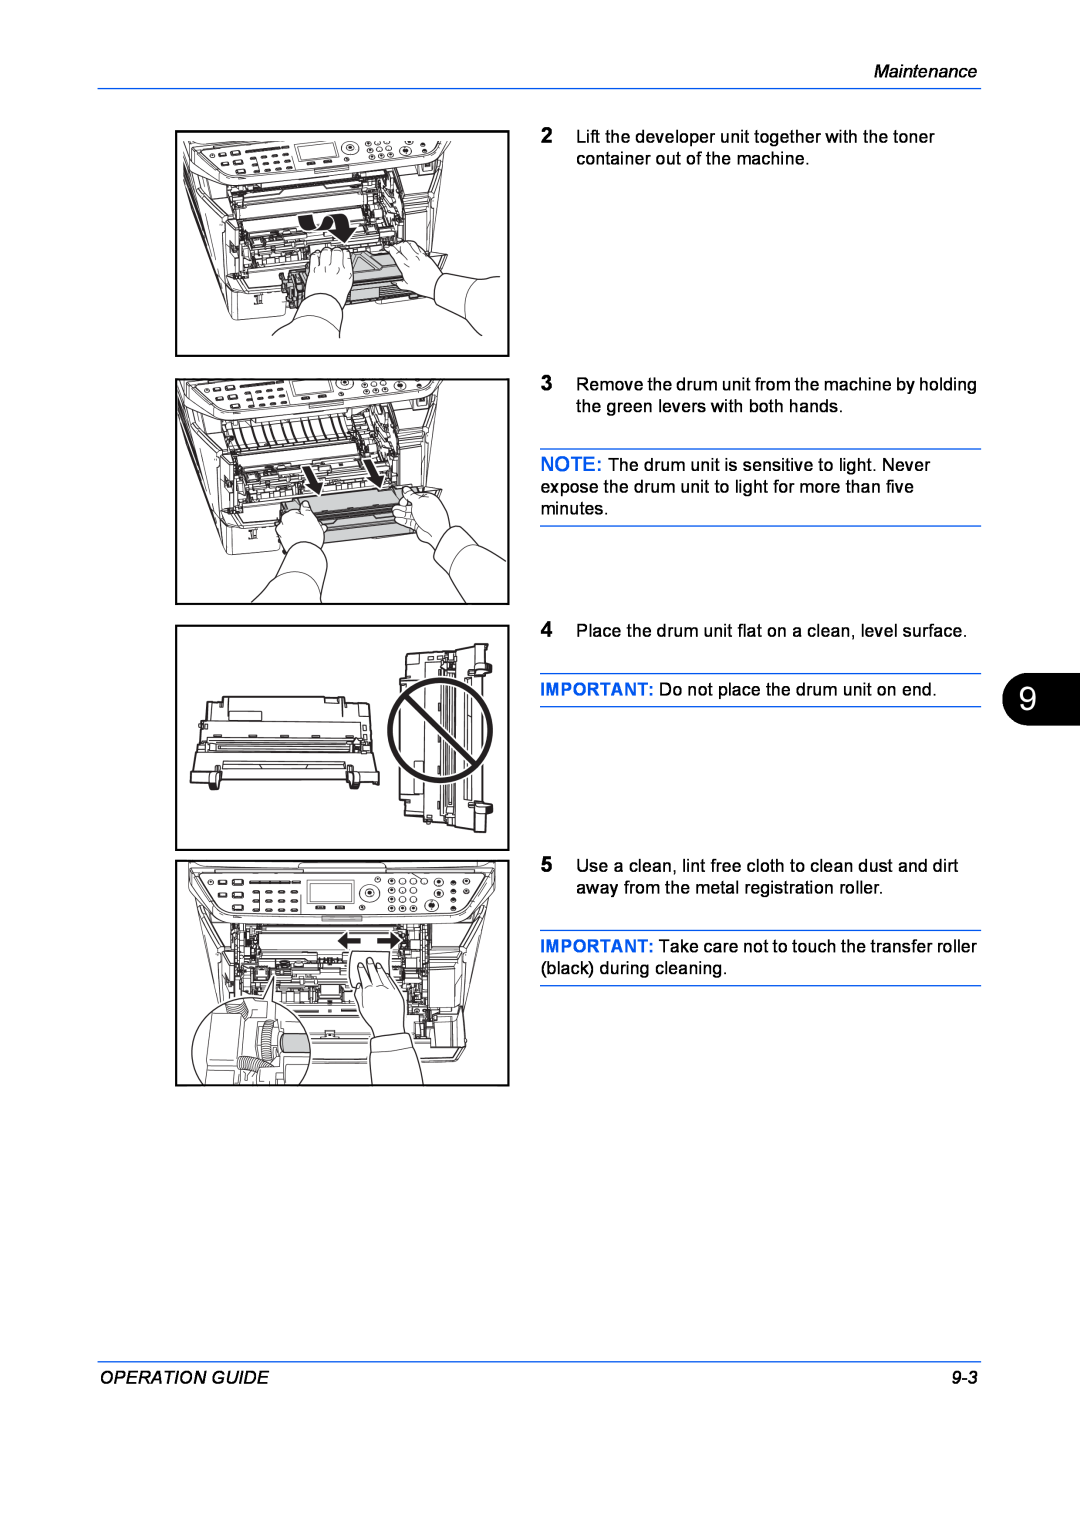 Kyocera FS-1128MFP, FS-1028MFP manual Maintenance, IMPORTANT Do not place the drum unit on end, Operation Guide 